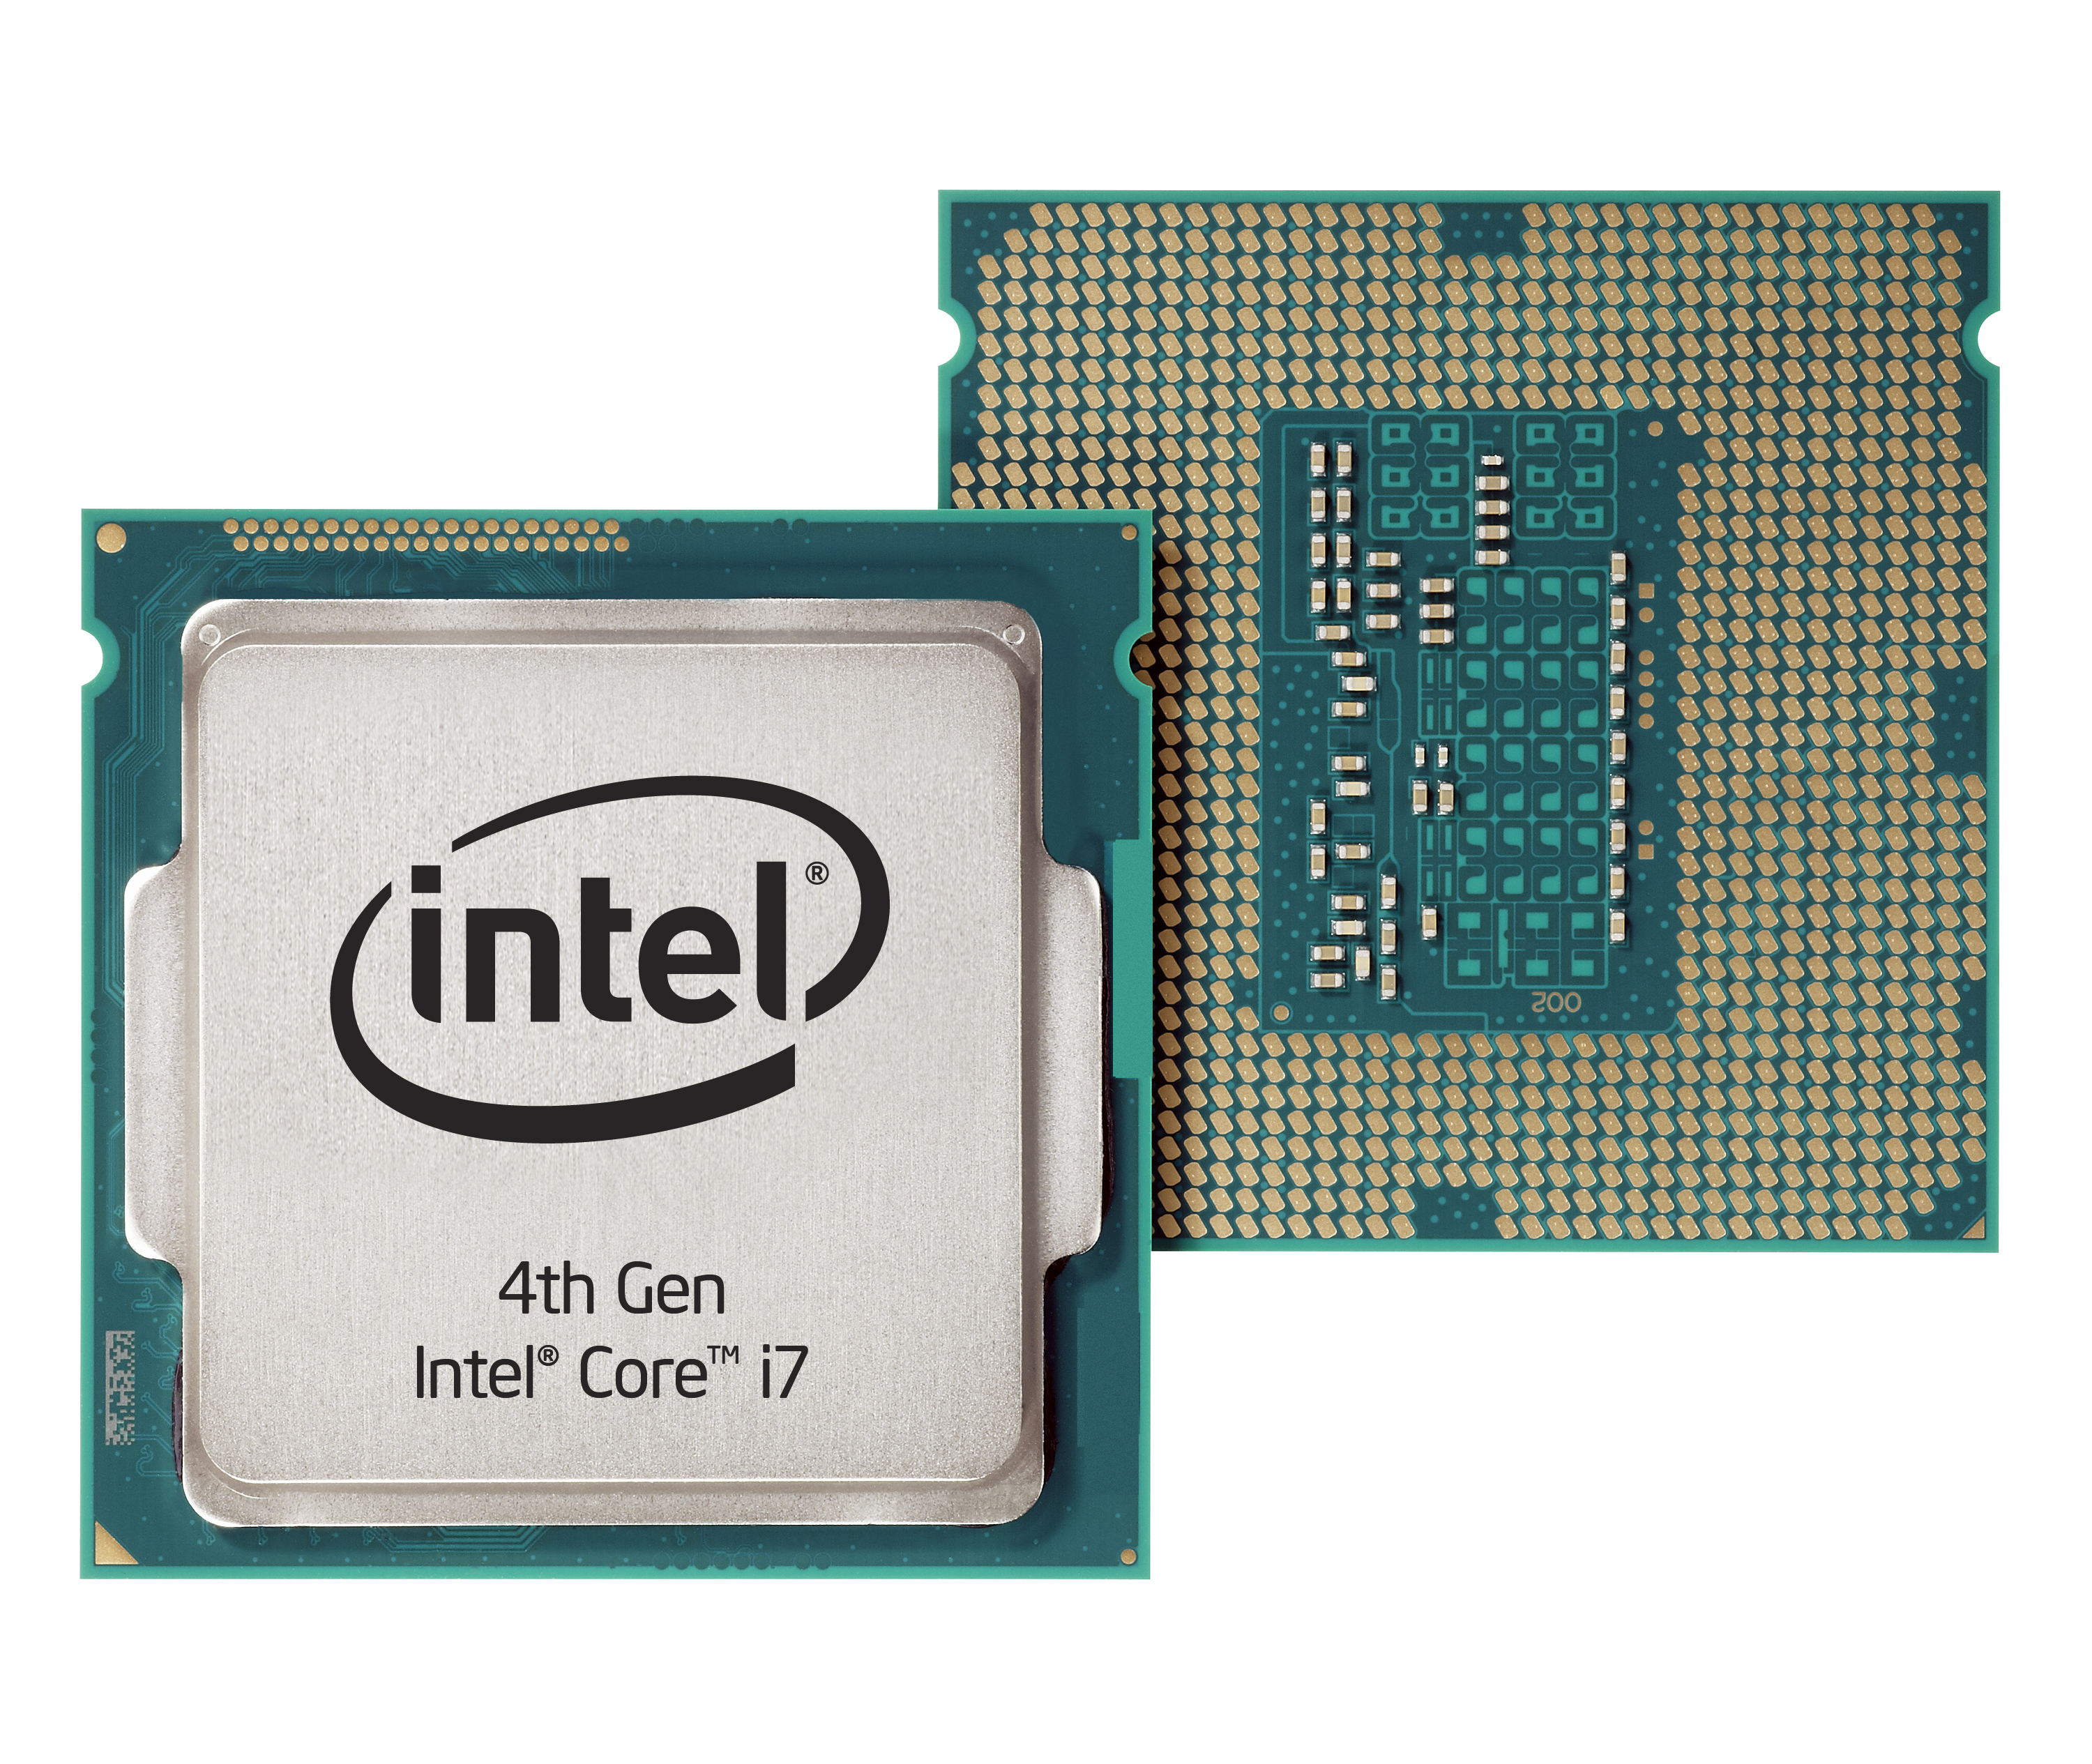 The Launch Lineup: Quad Cores For All - The Haswell Review: Intel 